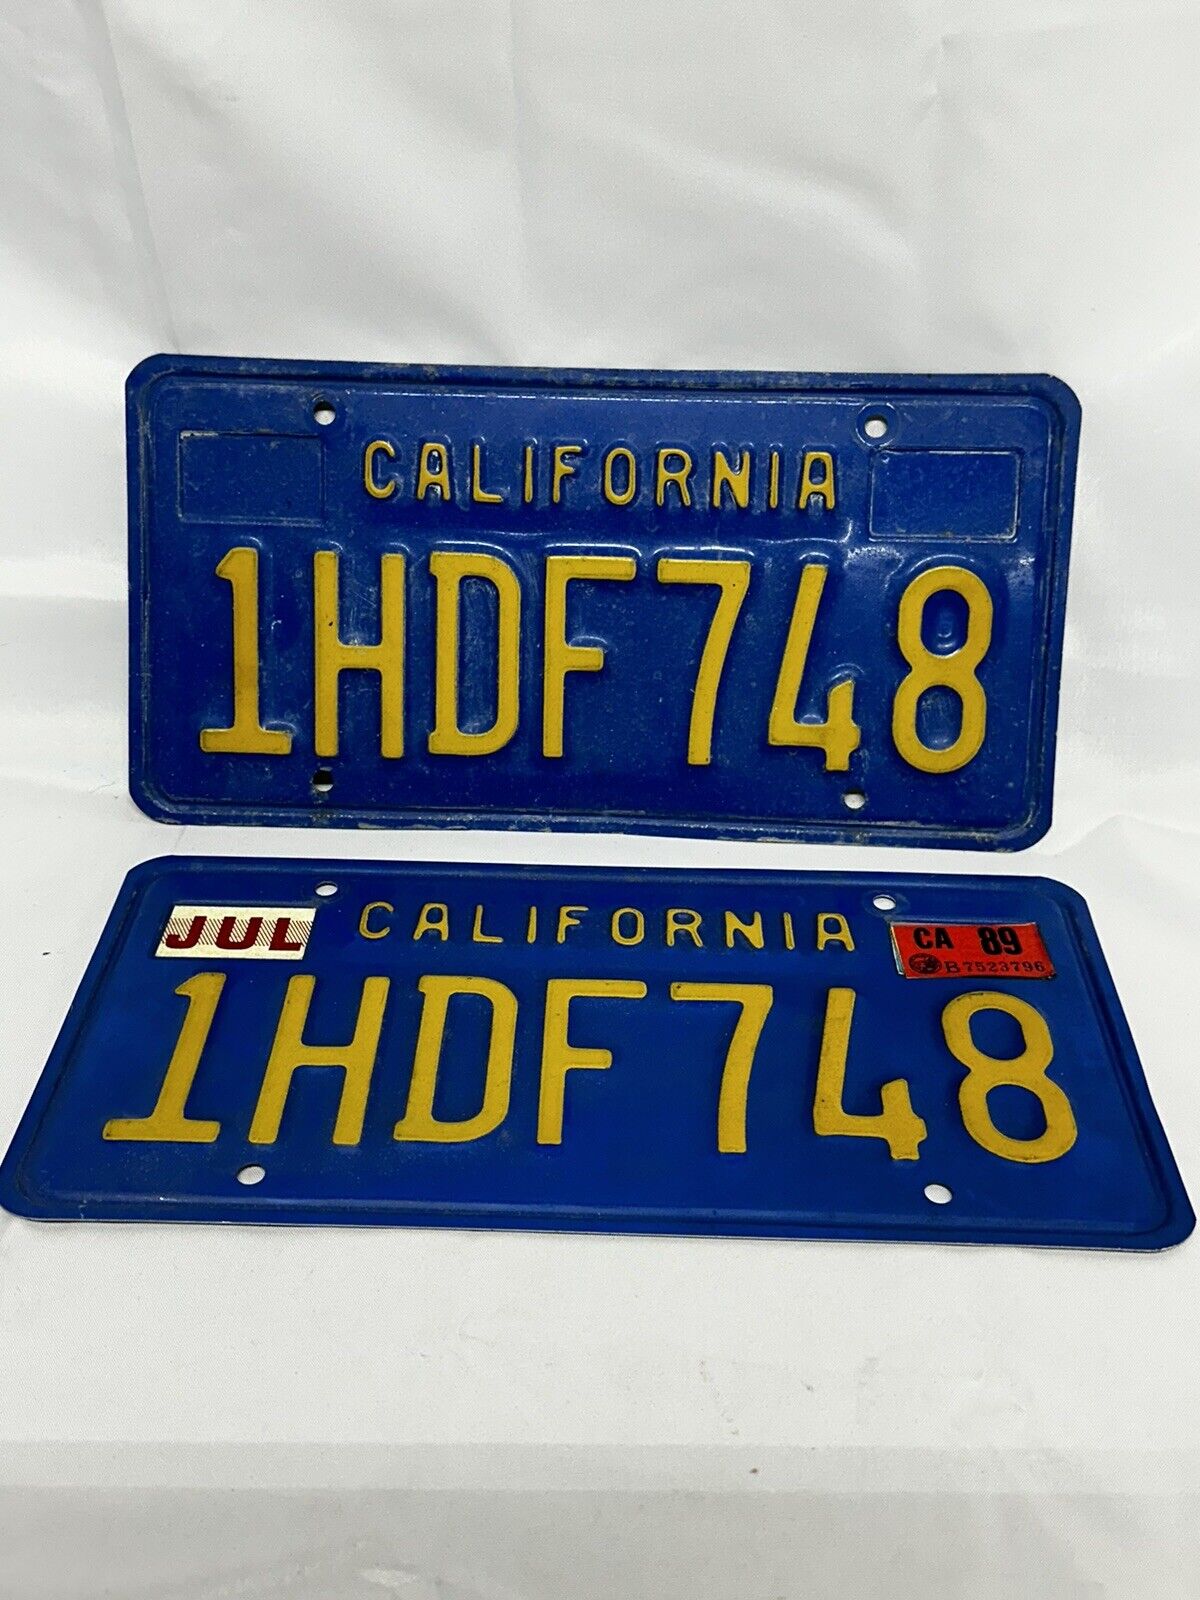 Vintage 1976 California License Plates 1HDF748 Matched Pair Blue & Yellow